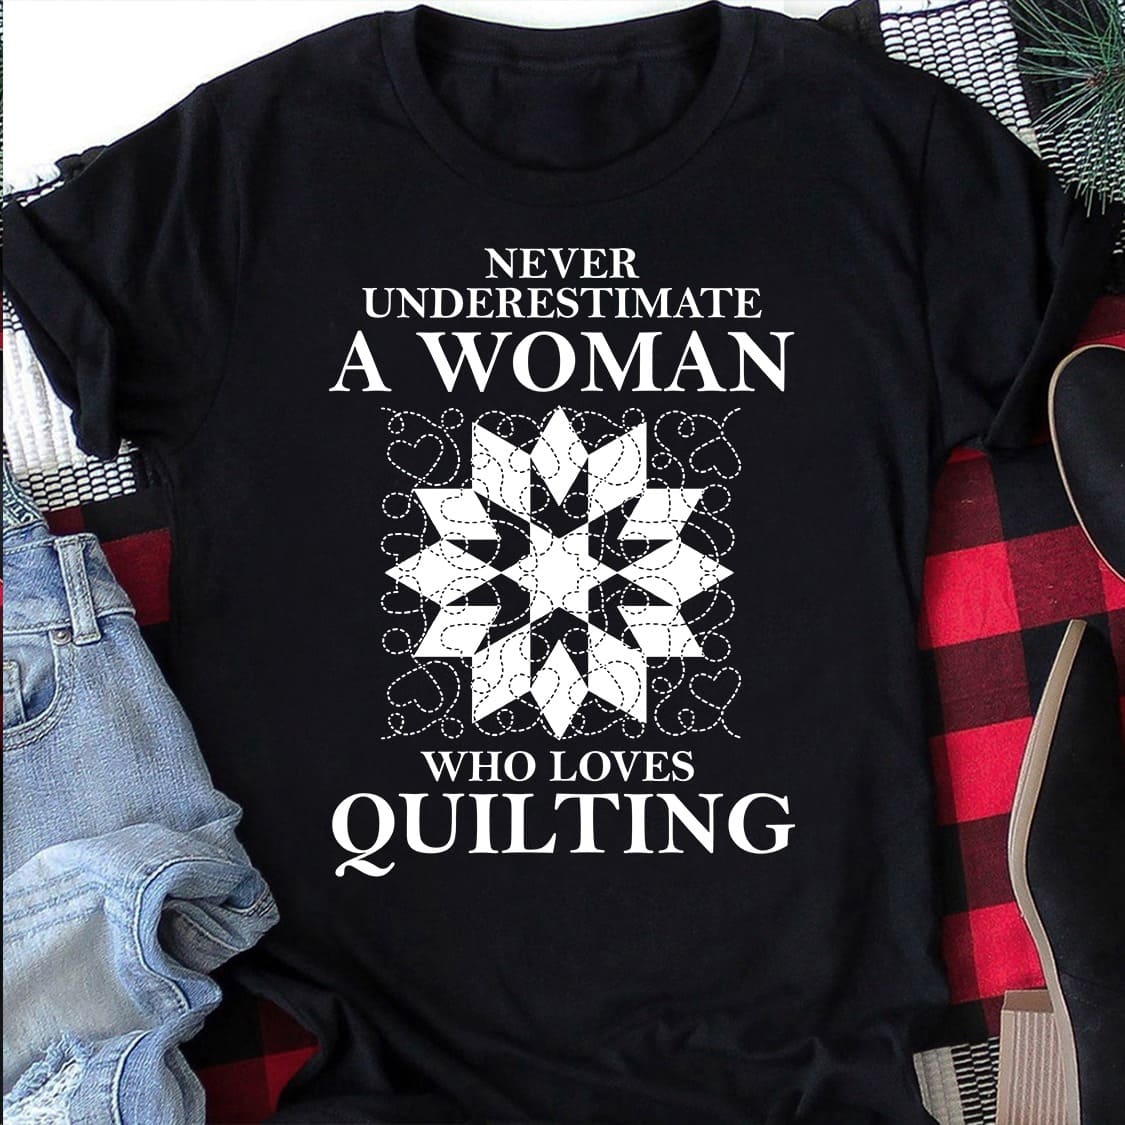 Never underestimate a woman who loves quilting - Quilting the hobby, gift for quilting woman